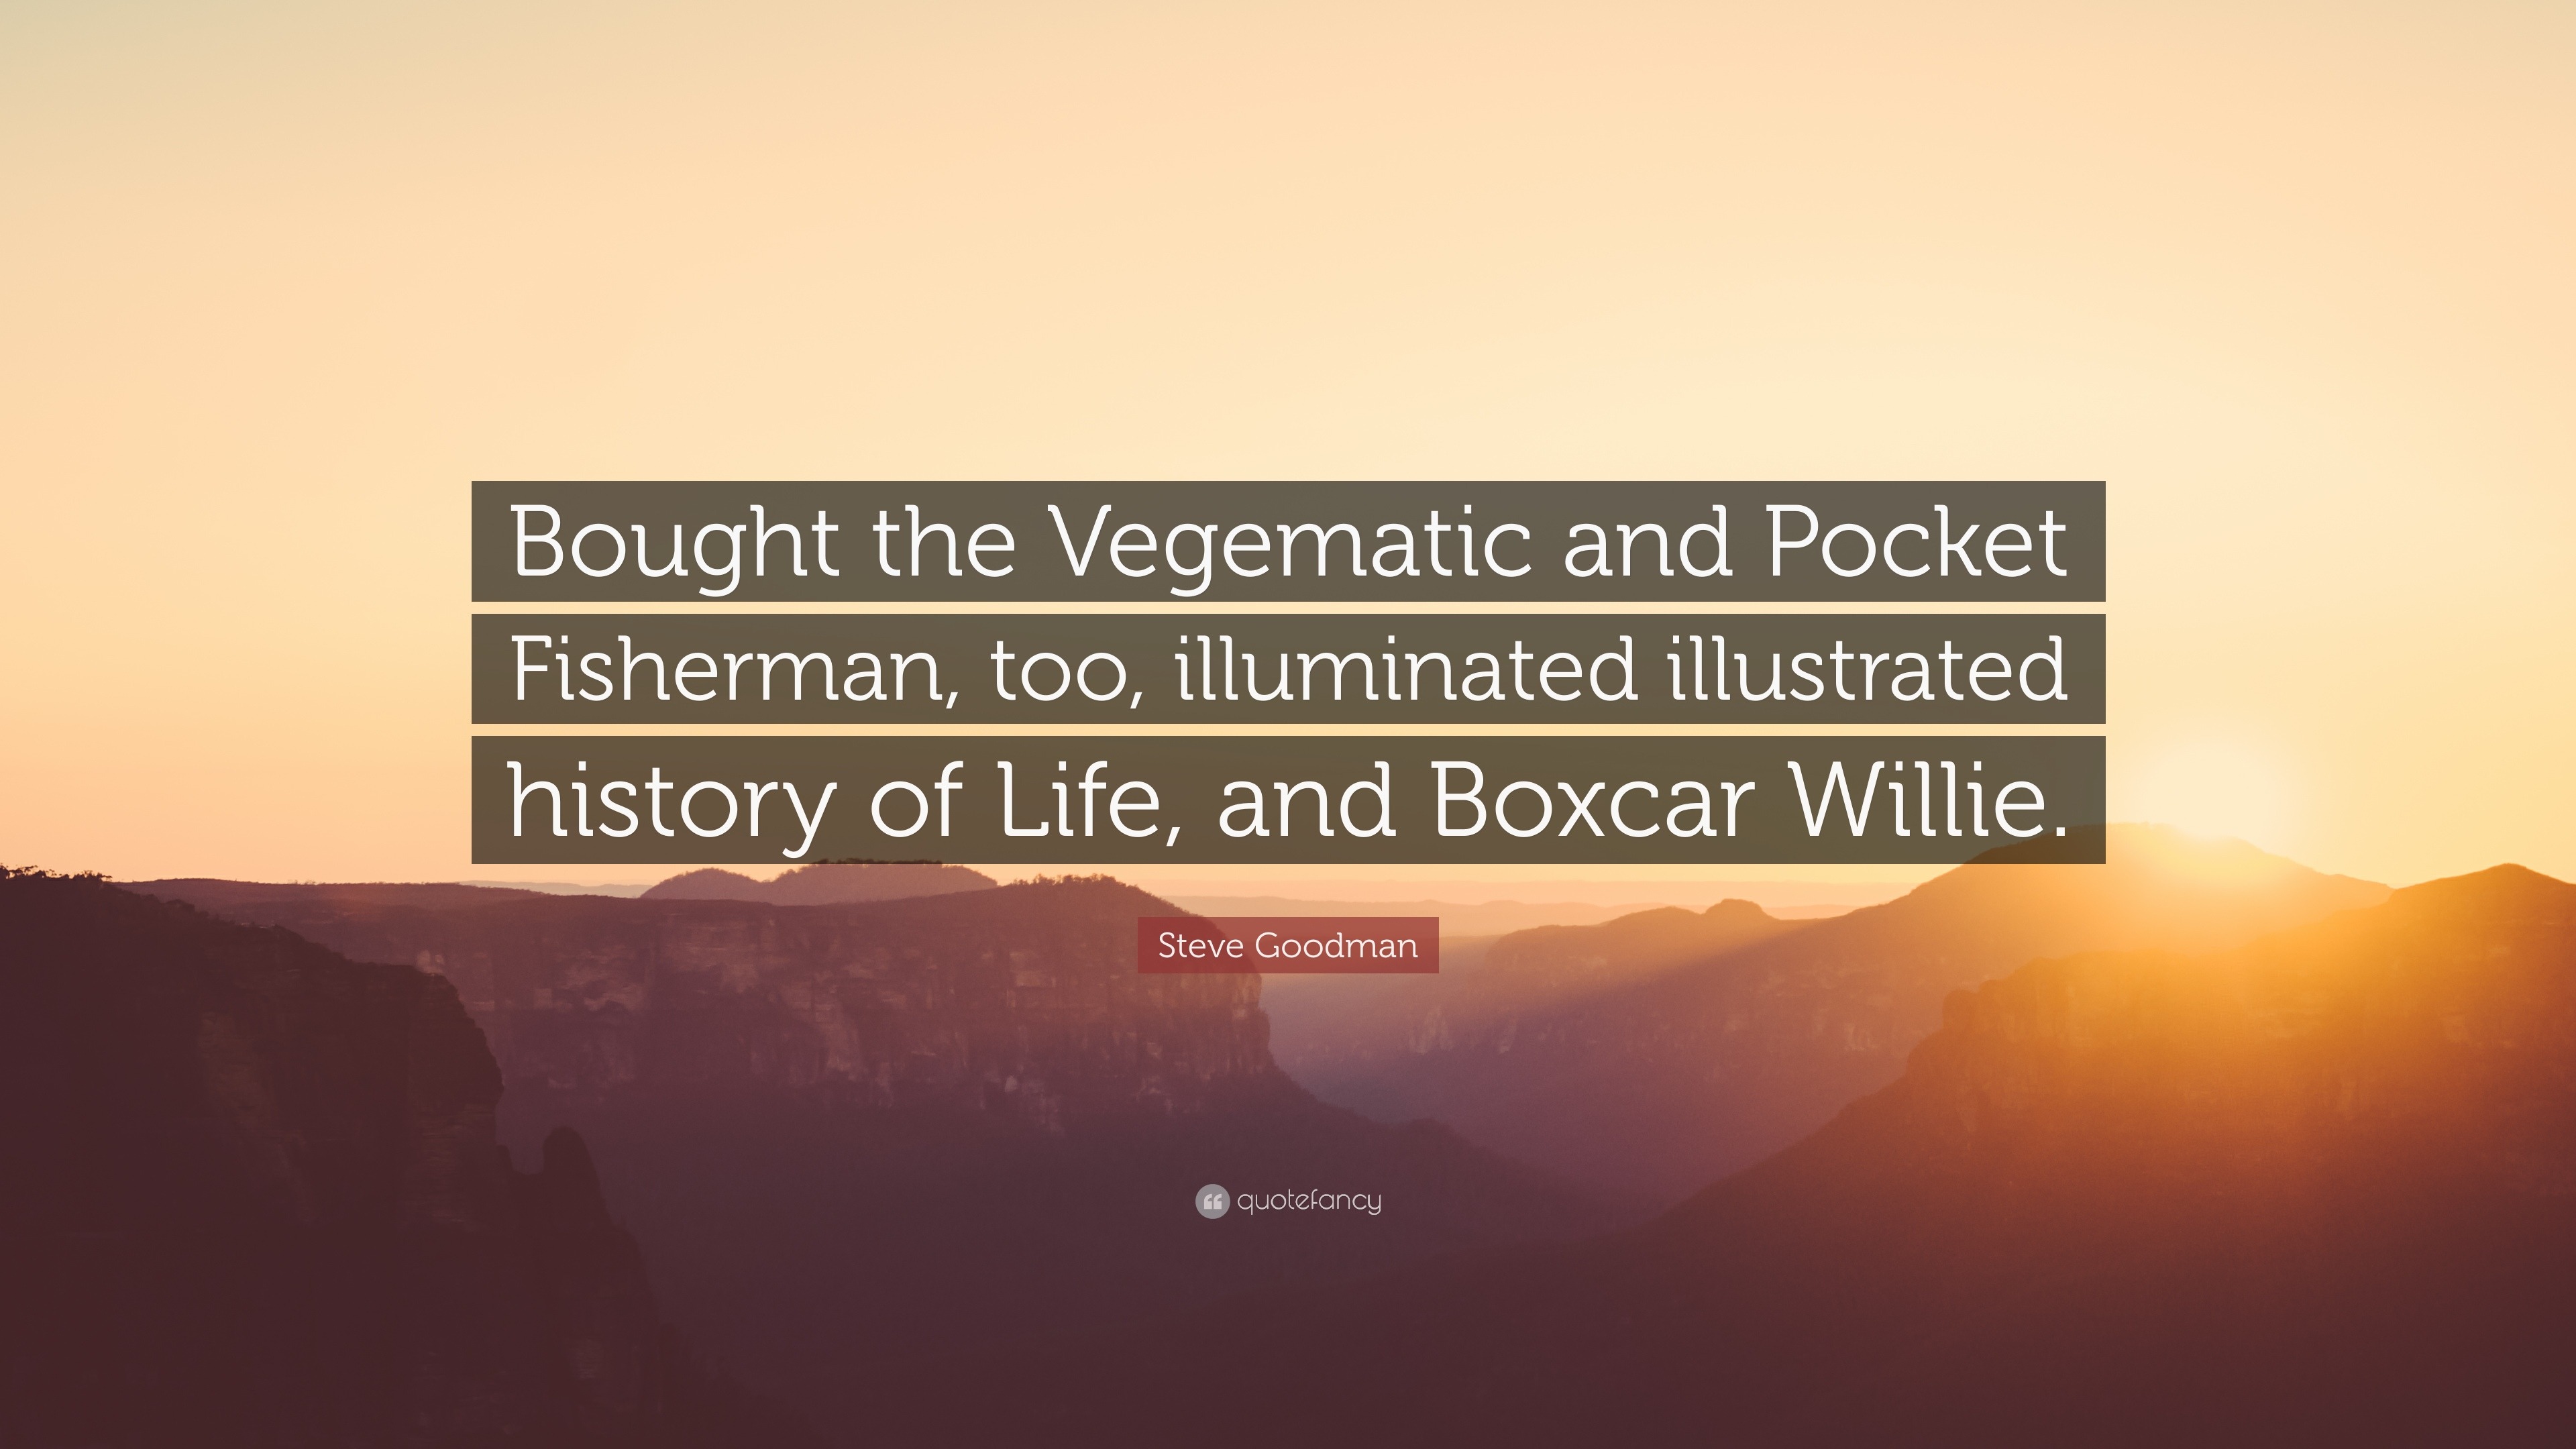 Steve Goodman Quote: “Bought the Vegematic and Pocket Fisherman